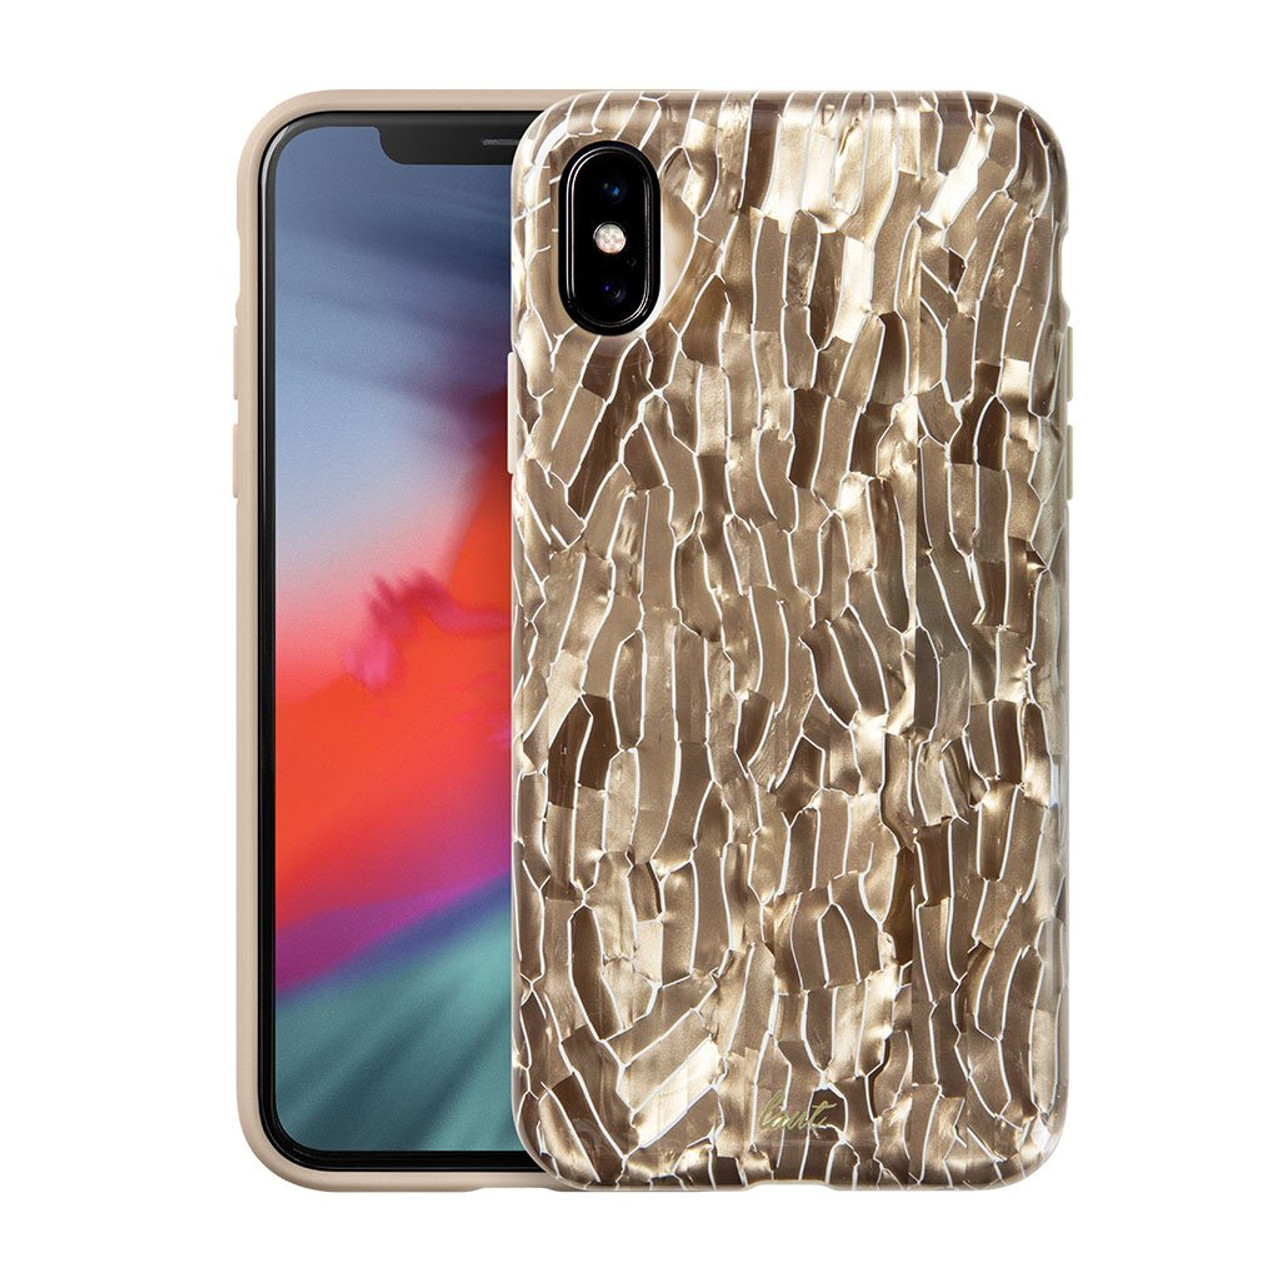 Laut Holo Iridescent Pearl Protective Case - for iPhone 13 Pro Max